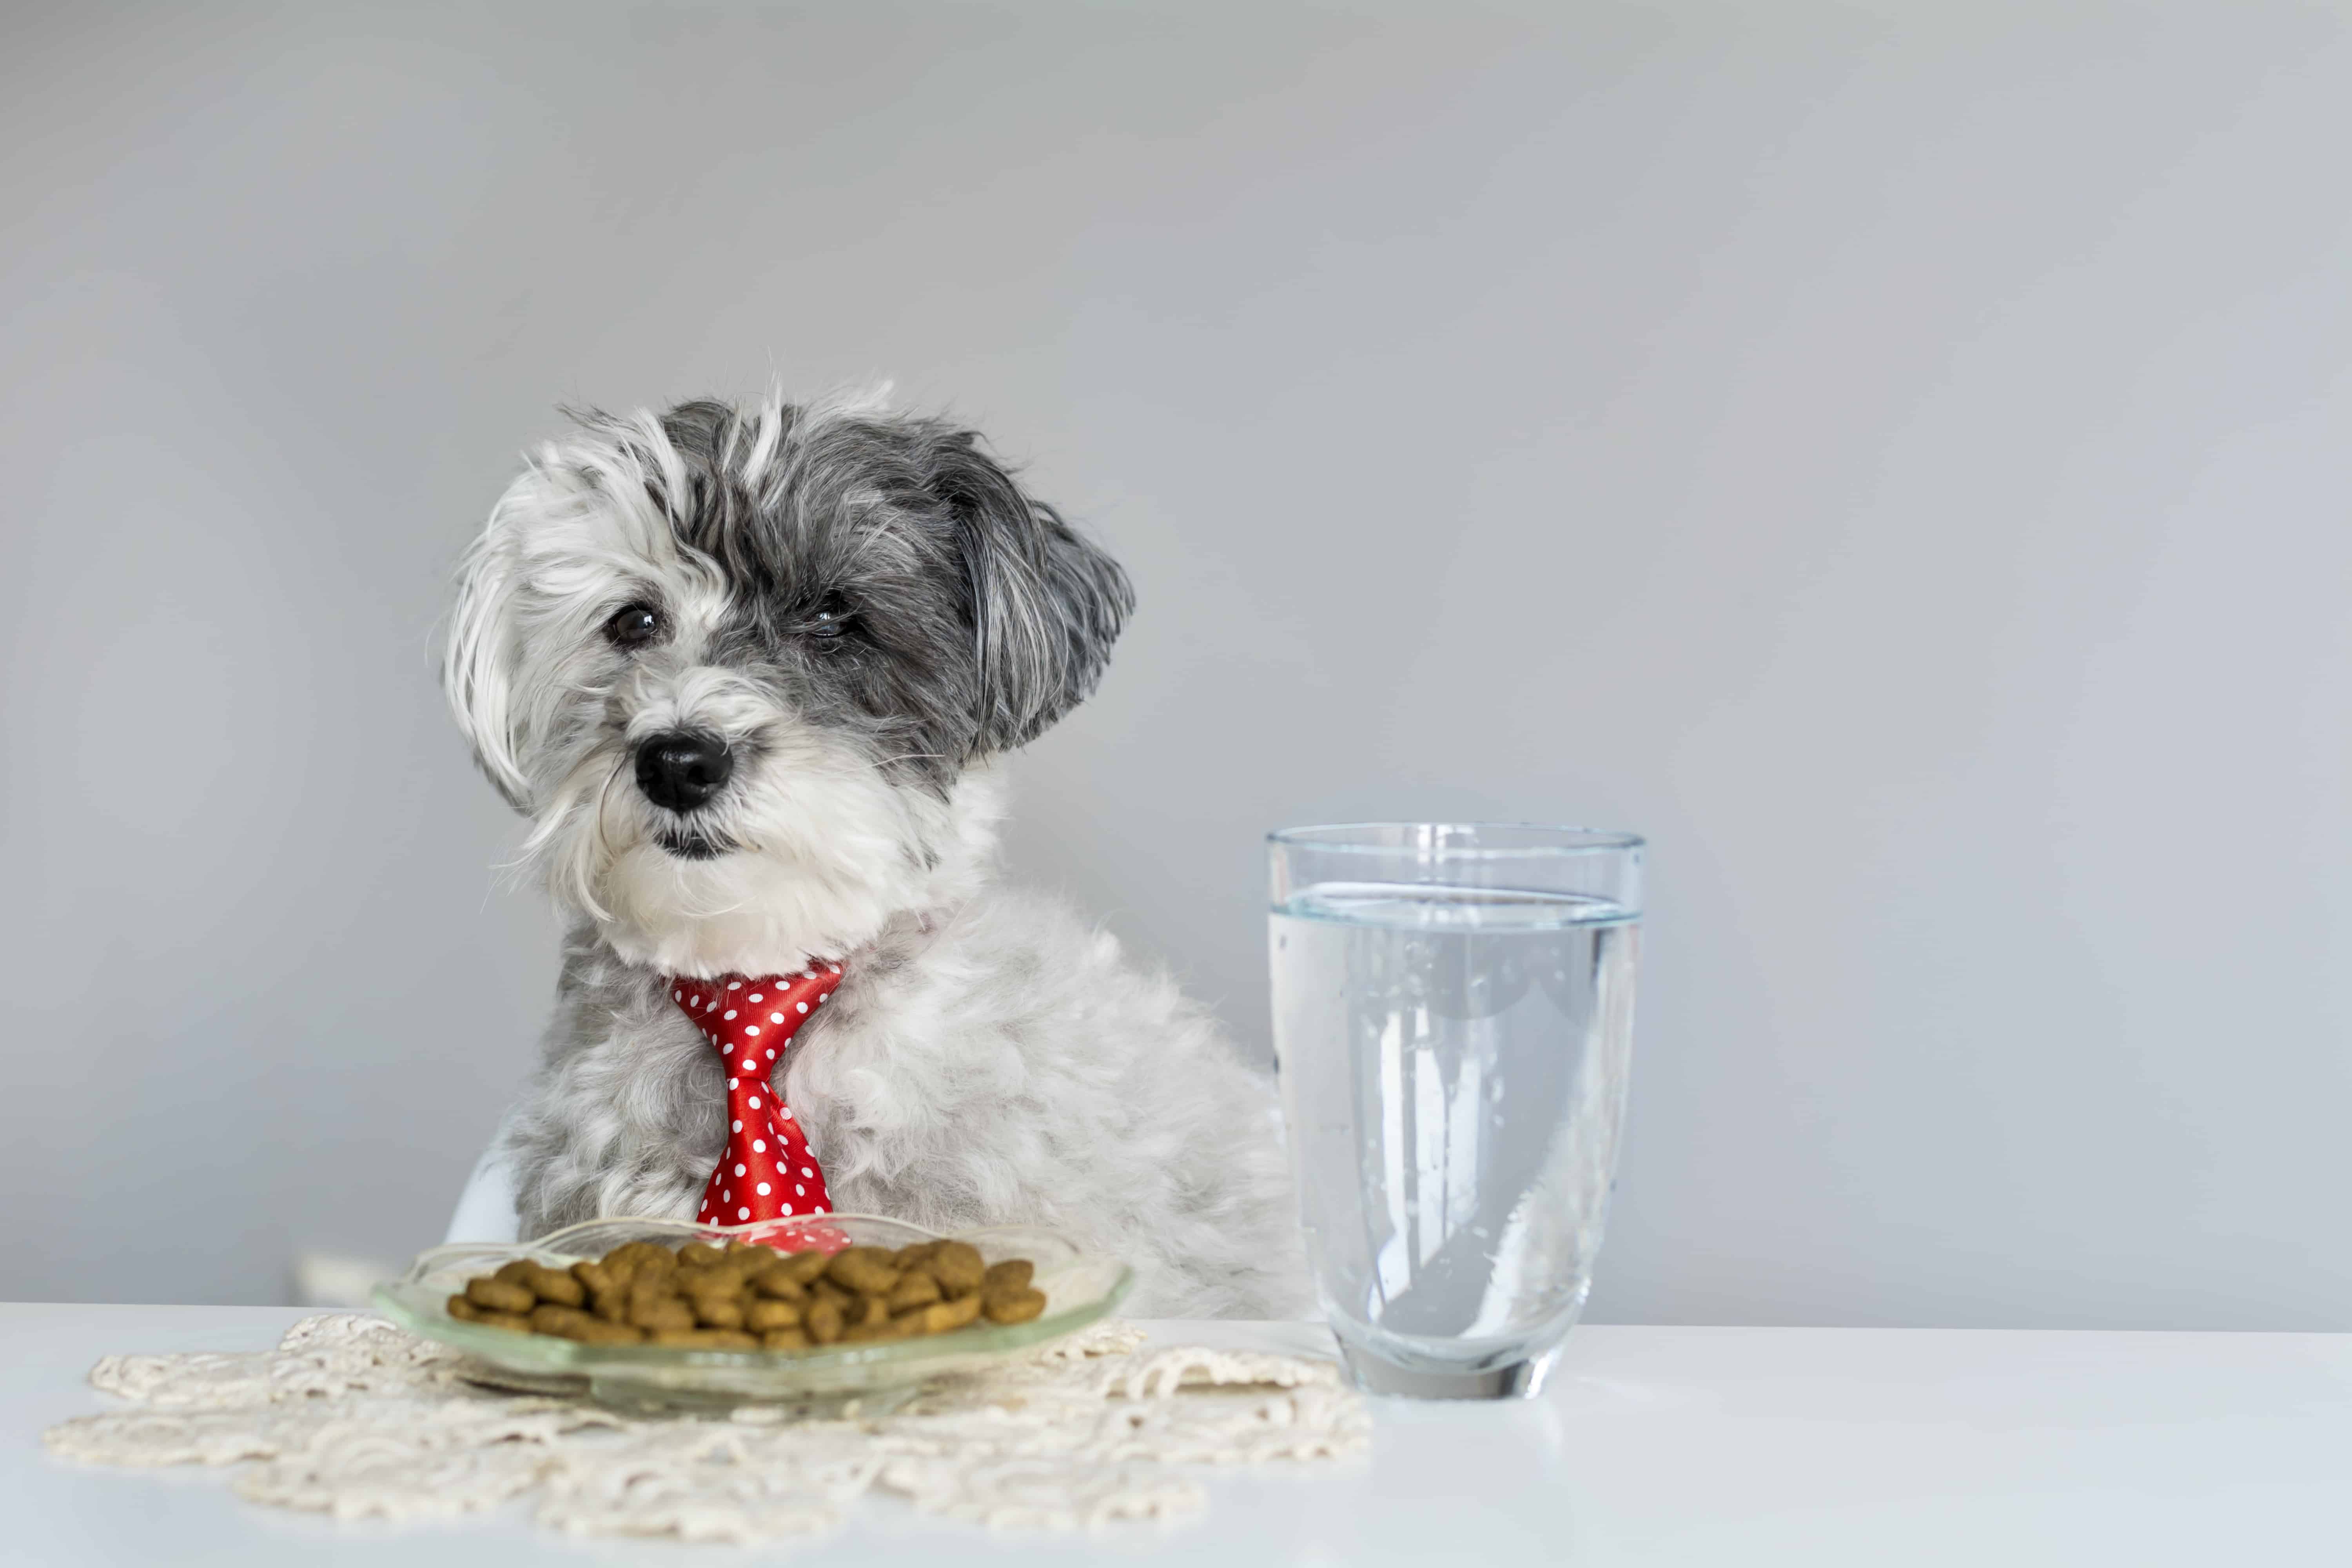 white poodle dog with red tie eating food at table